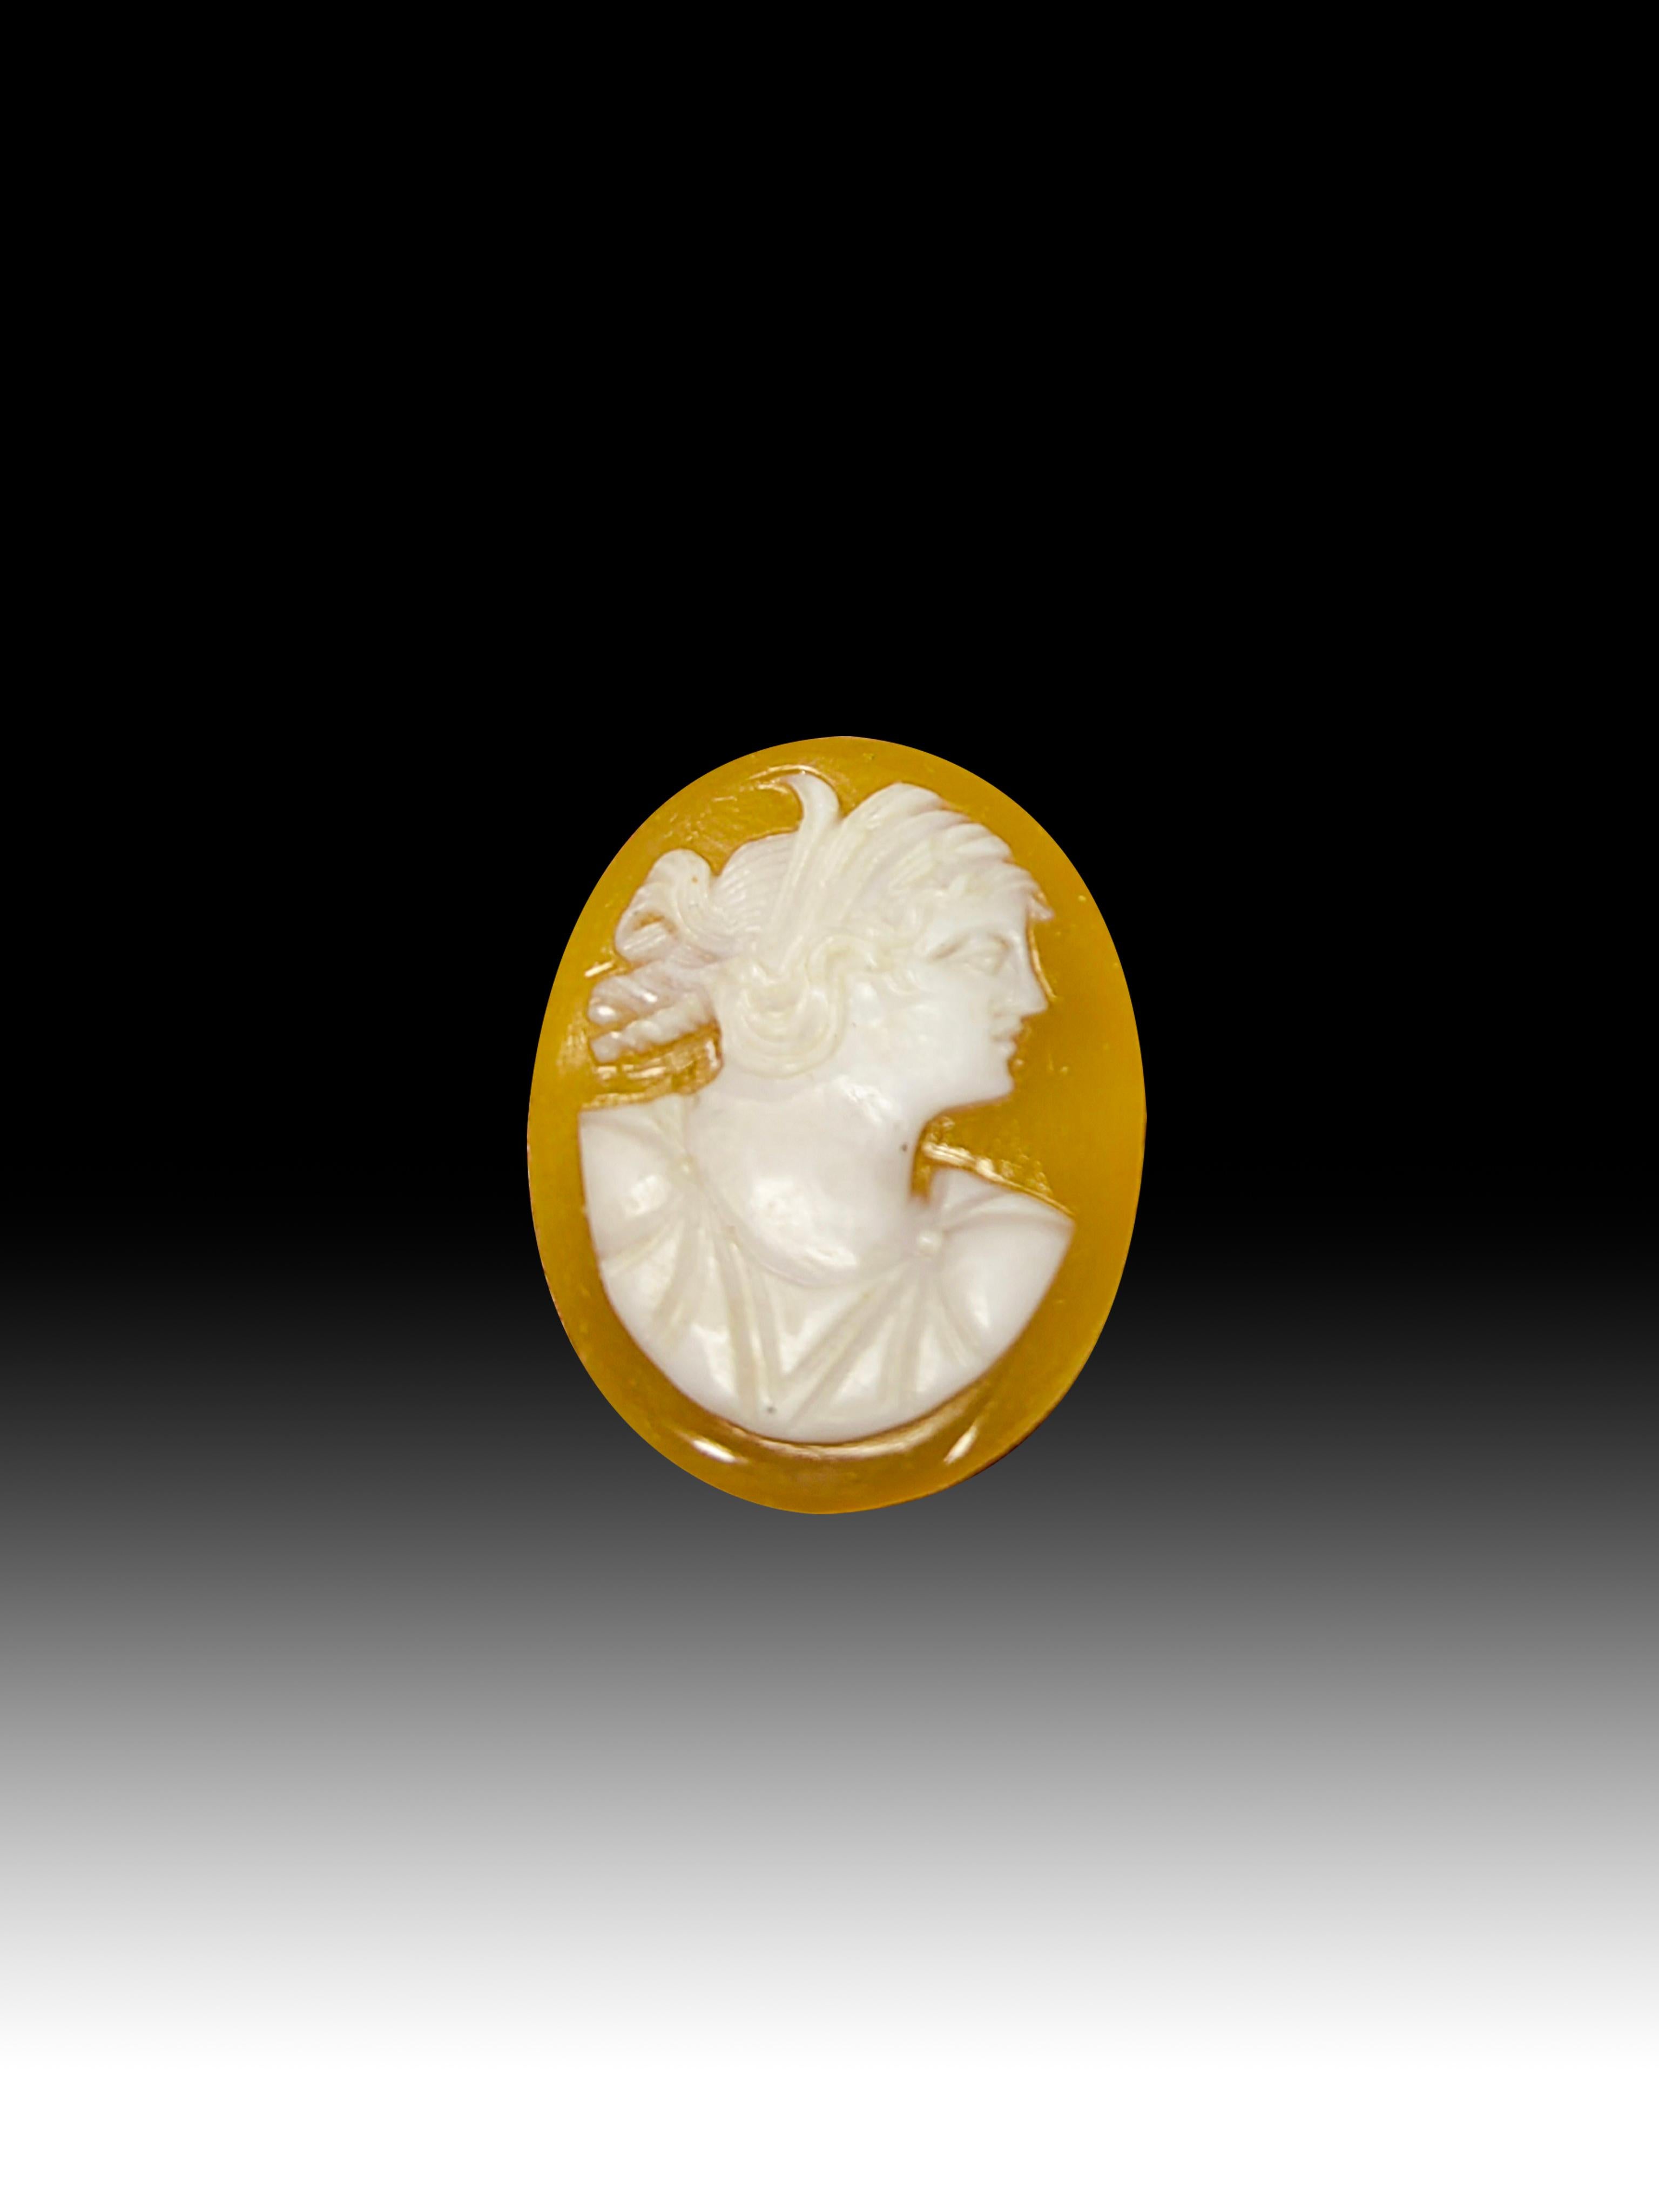 1920s Cameo
Elegant cameo from the 1920s carved in a shell and decorated with gilded brass.Dimensions:2x1,5x0.5 cm